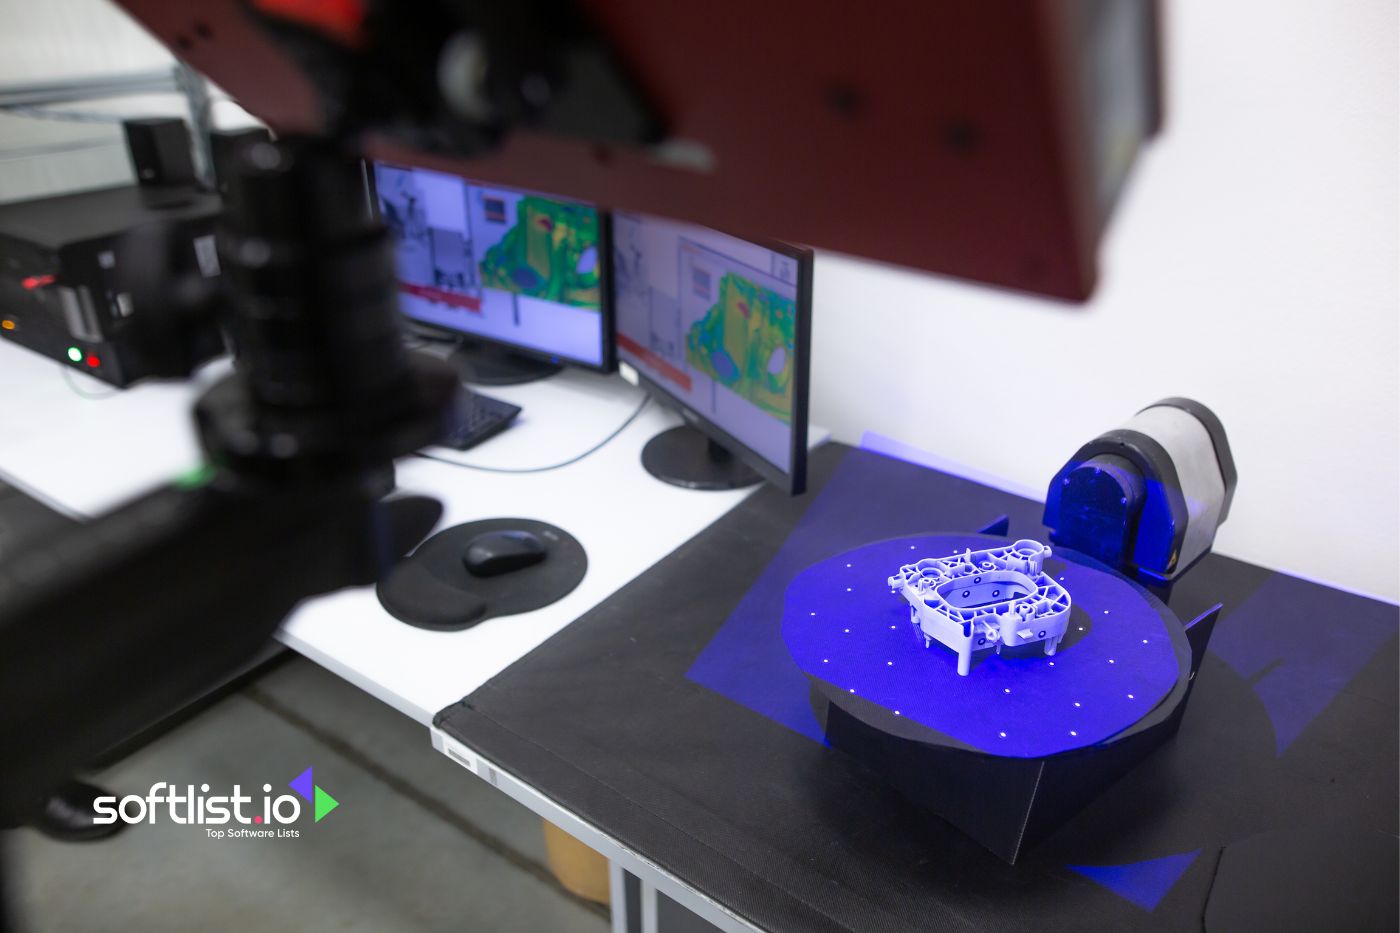 Object on 3D scanning turntable with monitors